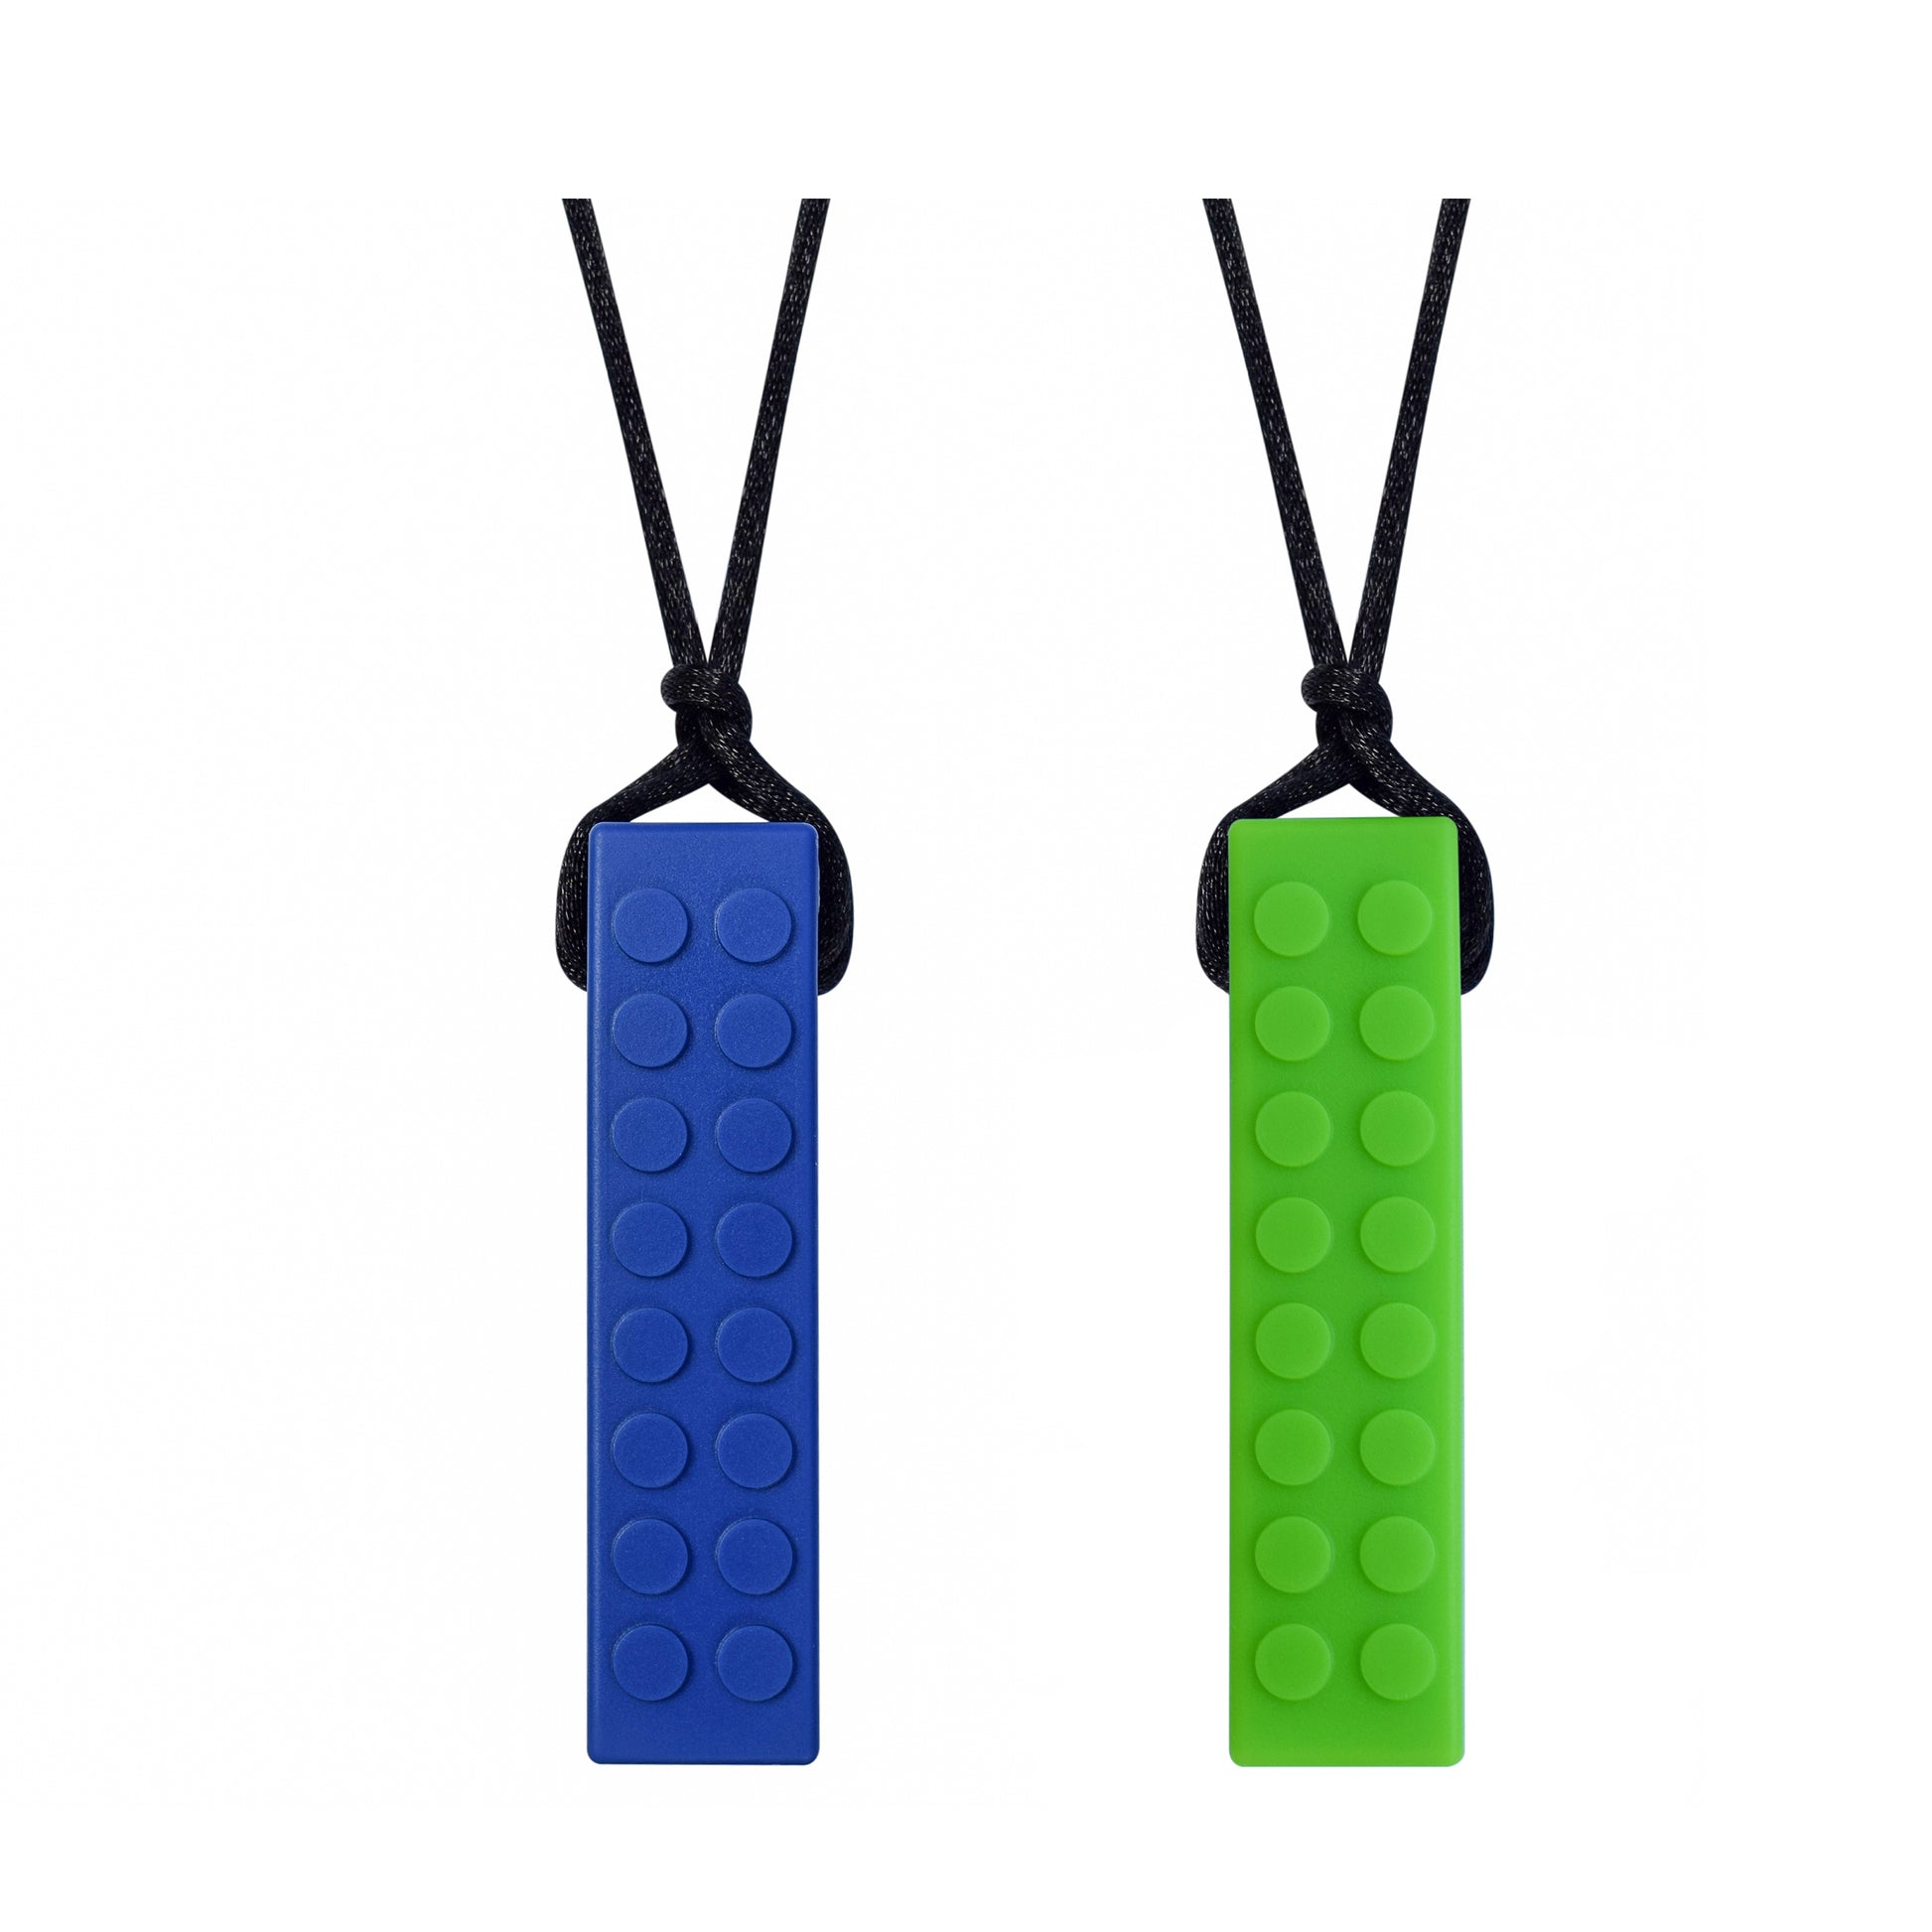 2 LEGO Brick Necklaces in Navy and Green